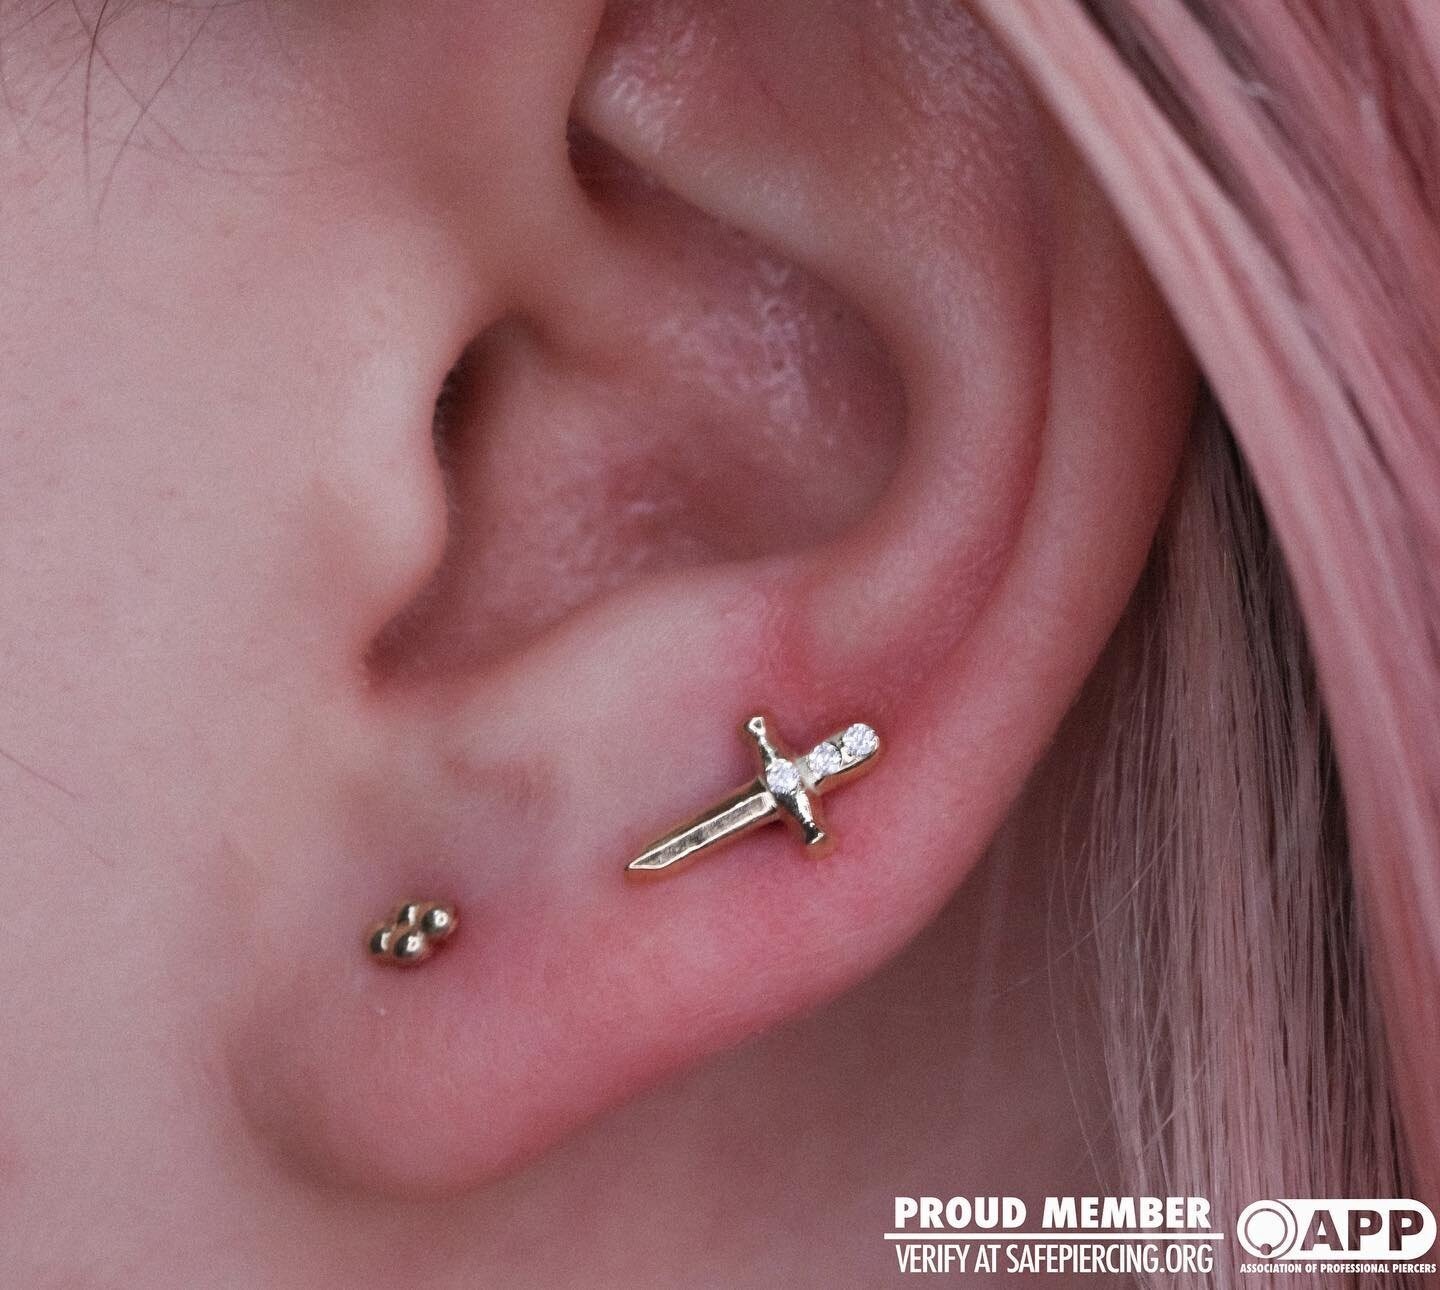 #Repost @raechelle.gabrielle​
---​
✨a little glitz and a little danger✨​
I got to do this awesome high lobe piercing using &ldquo;Choose Your Weapon&rdquo; from mayajewelry in yellow gold. It fits so wonderful into the grooves of their ear! ​
​
Also 